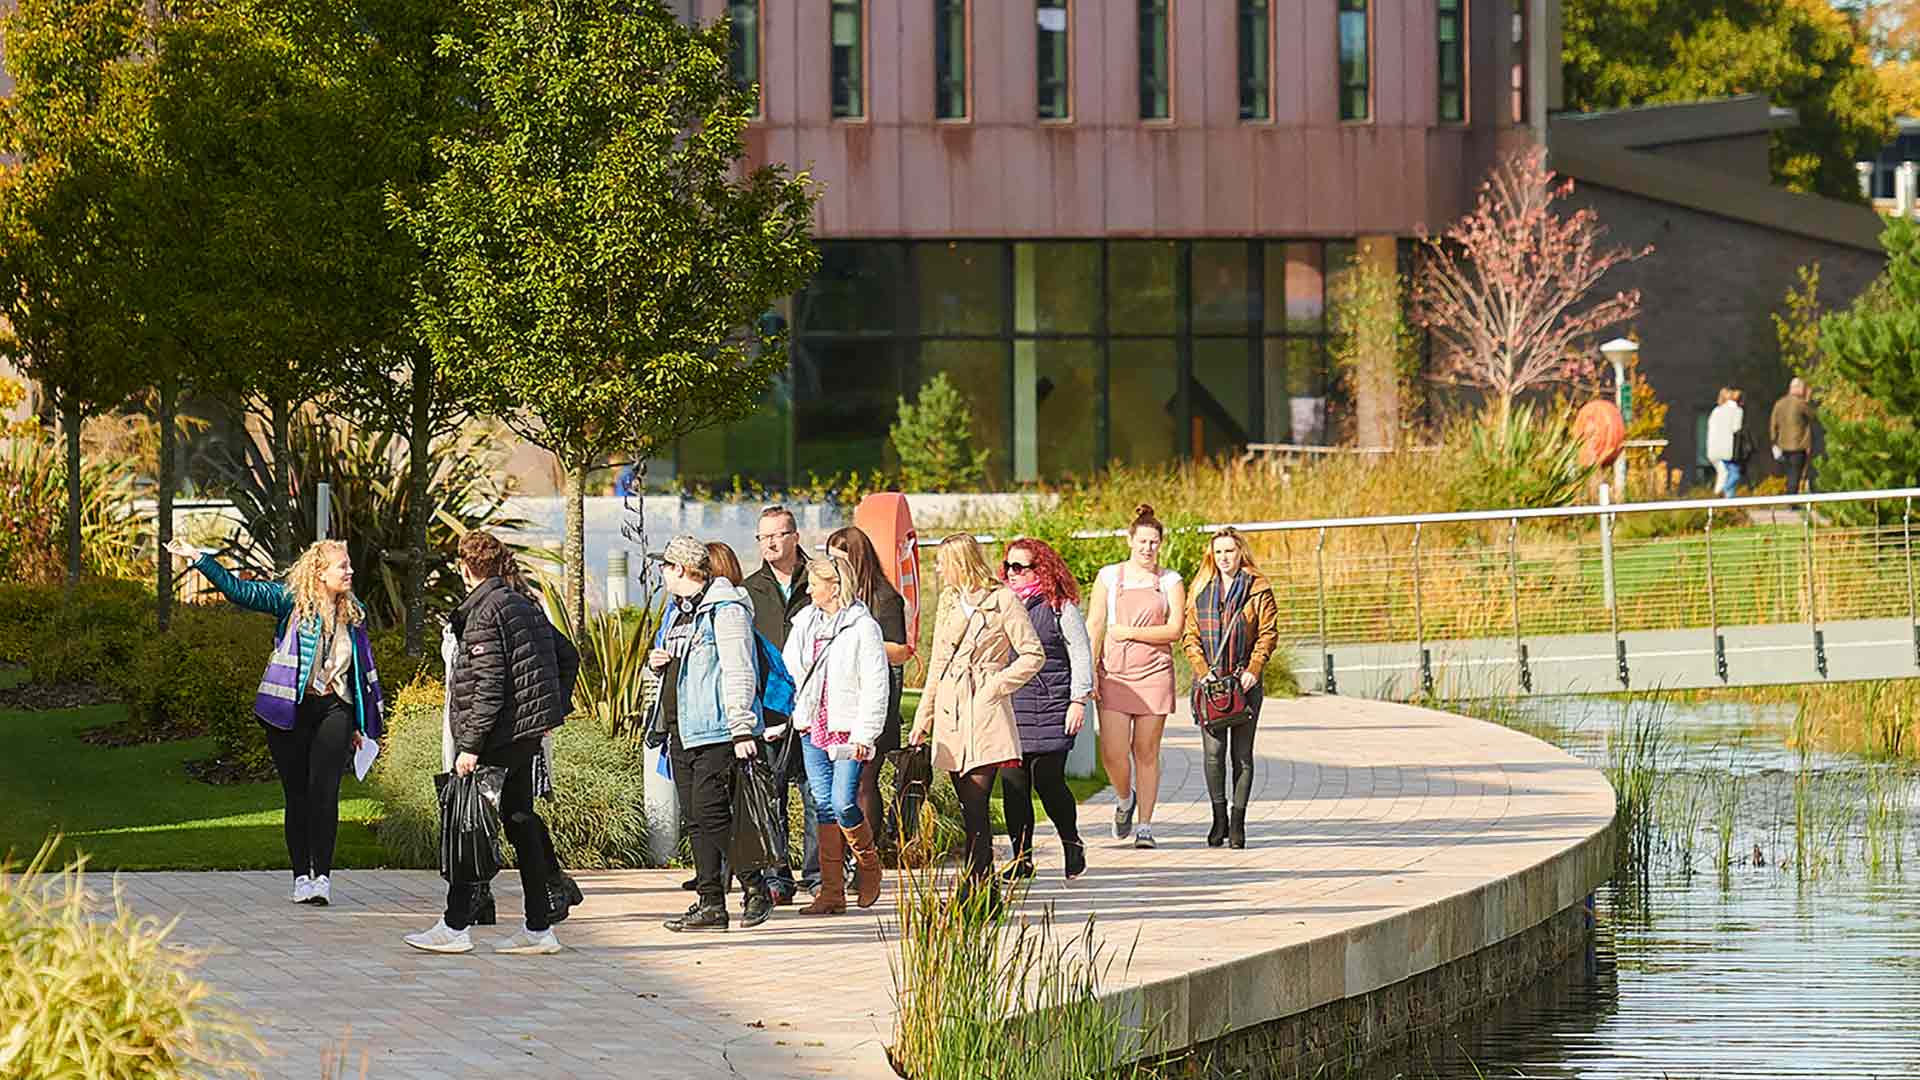 A student guide leads a group of prospective students and their family members on a tour of the campus, seen here near the Catalyst building.